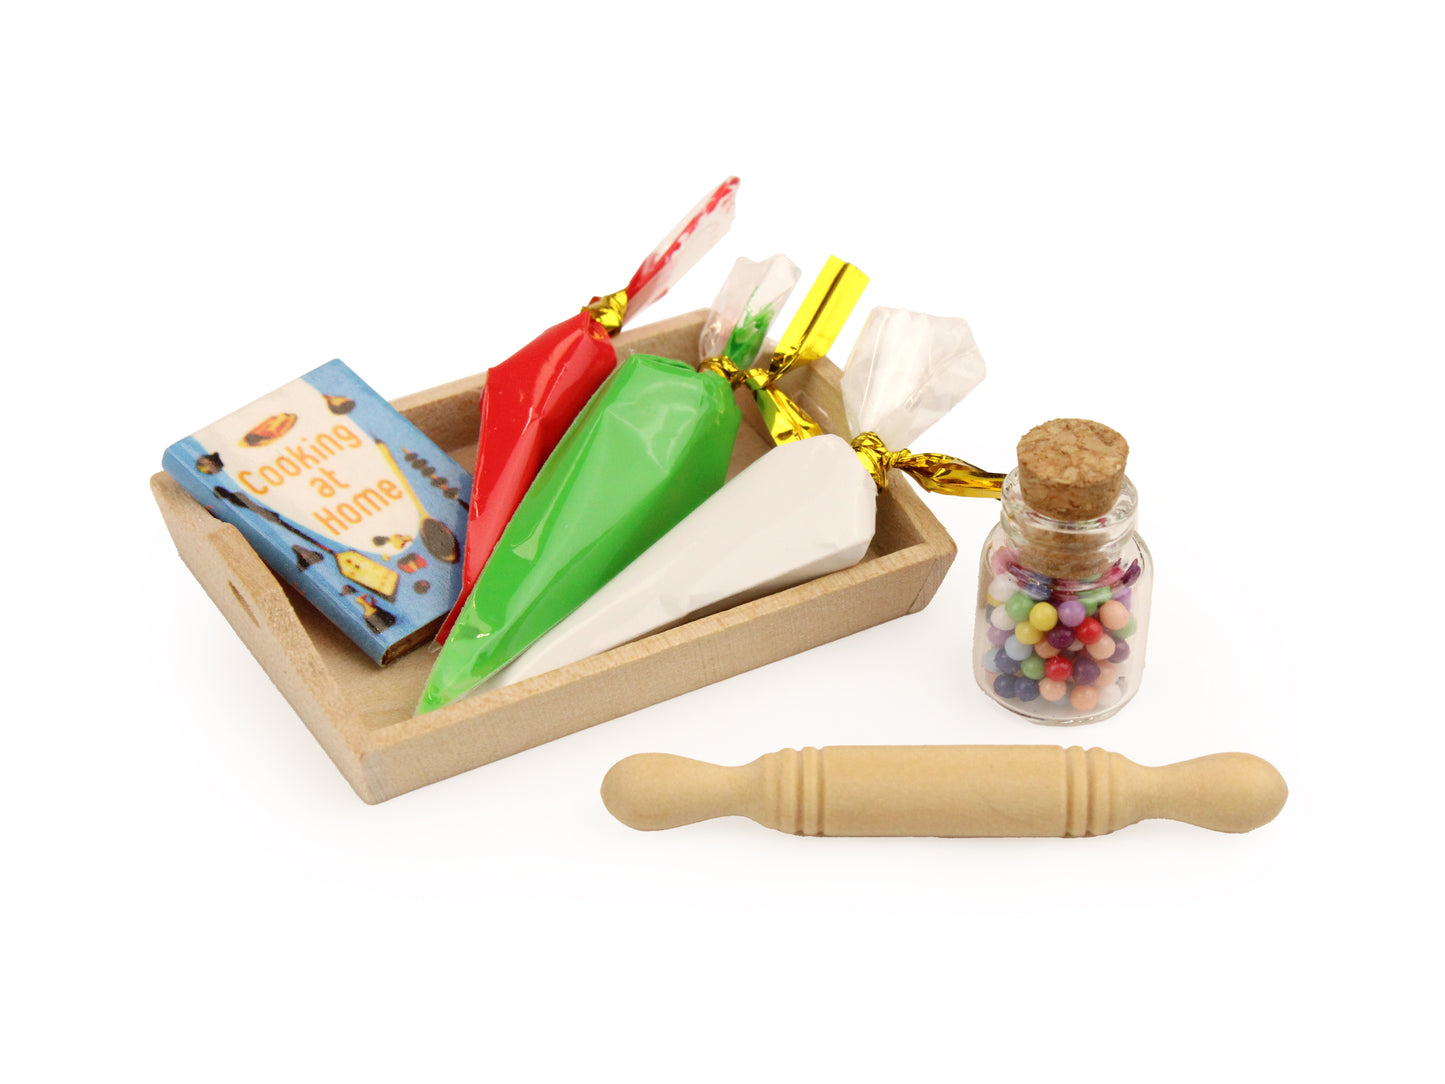 Baking Set for Needle Felted Characters - The Makerss